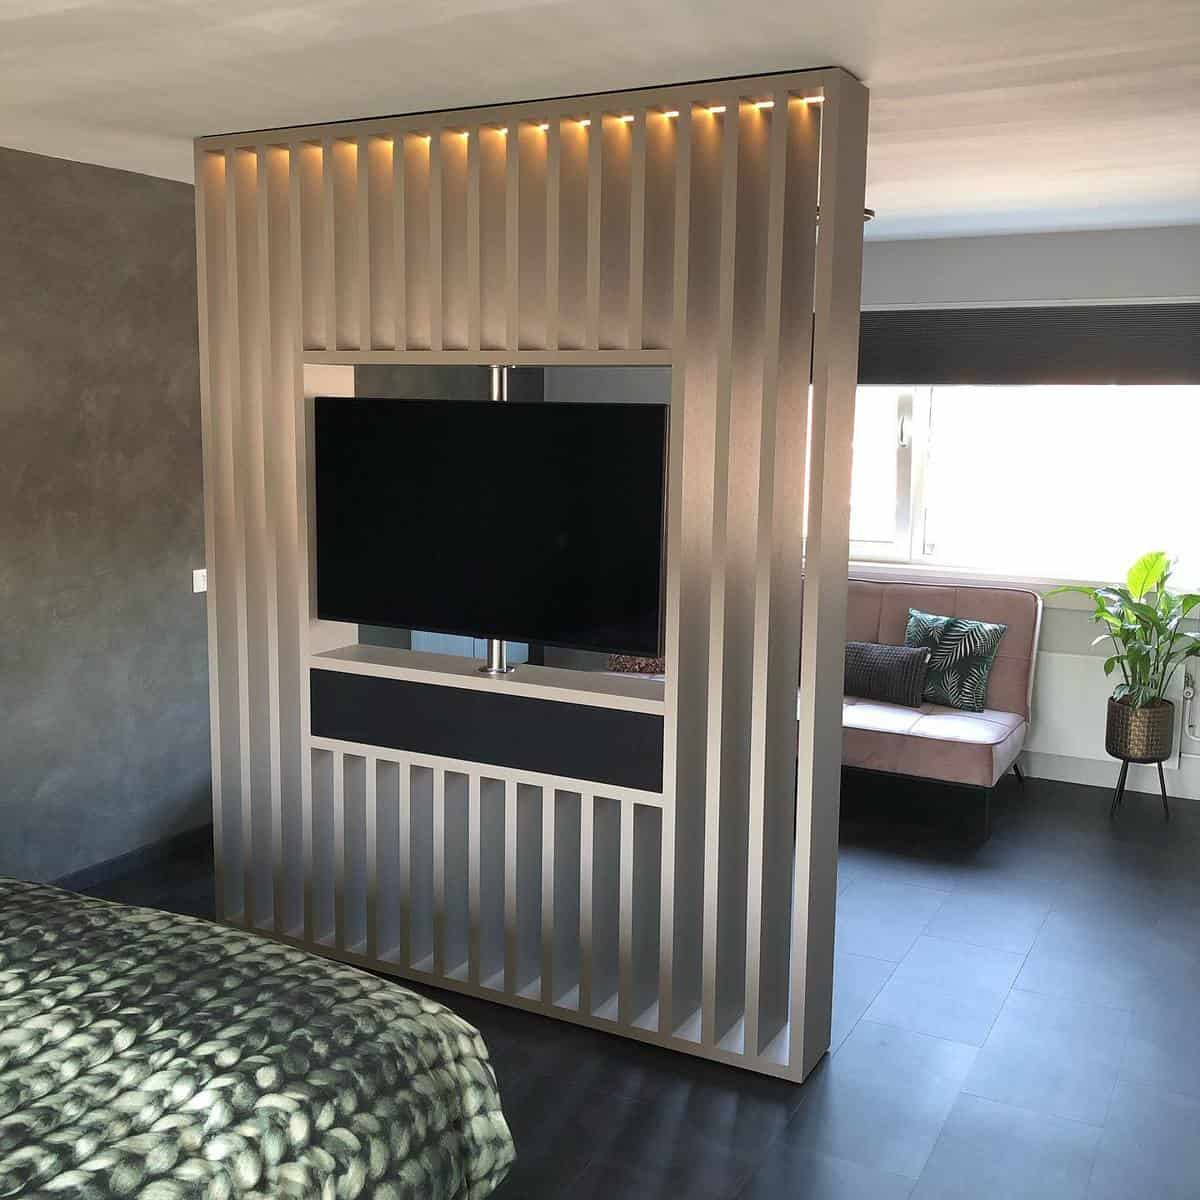 Wall divider with mounted TV in bedroom 